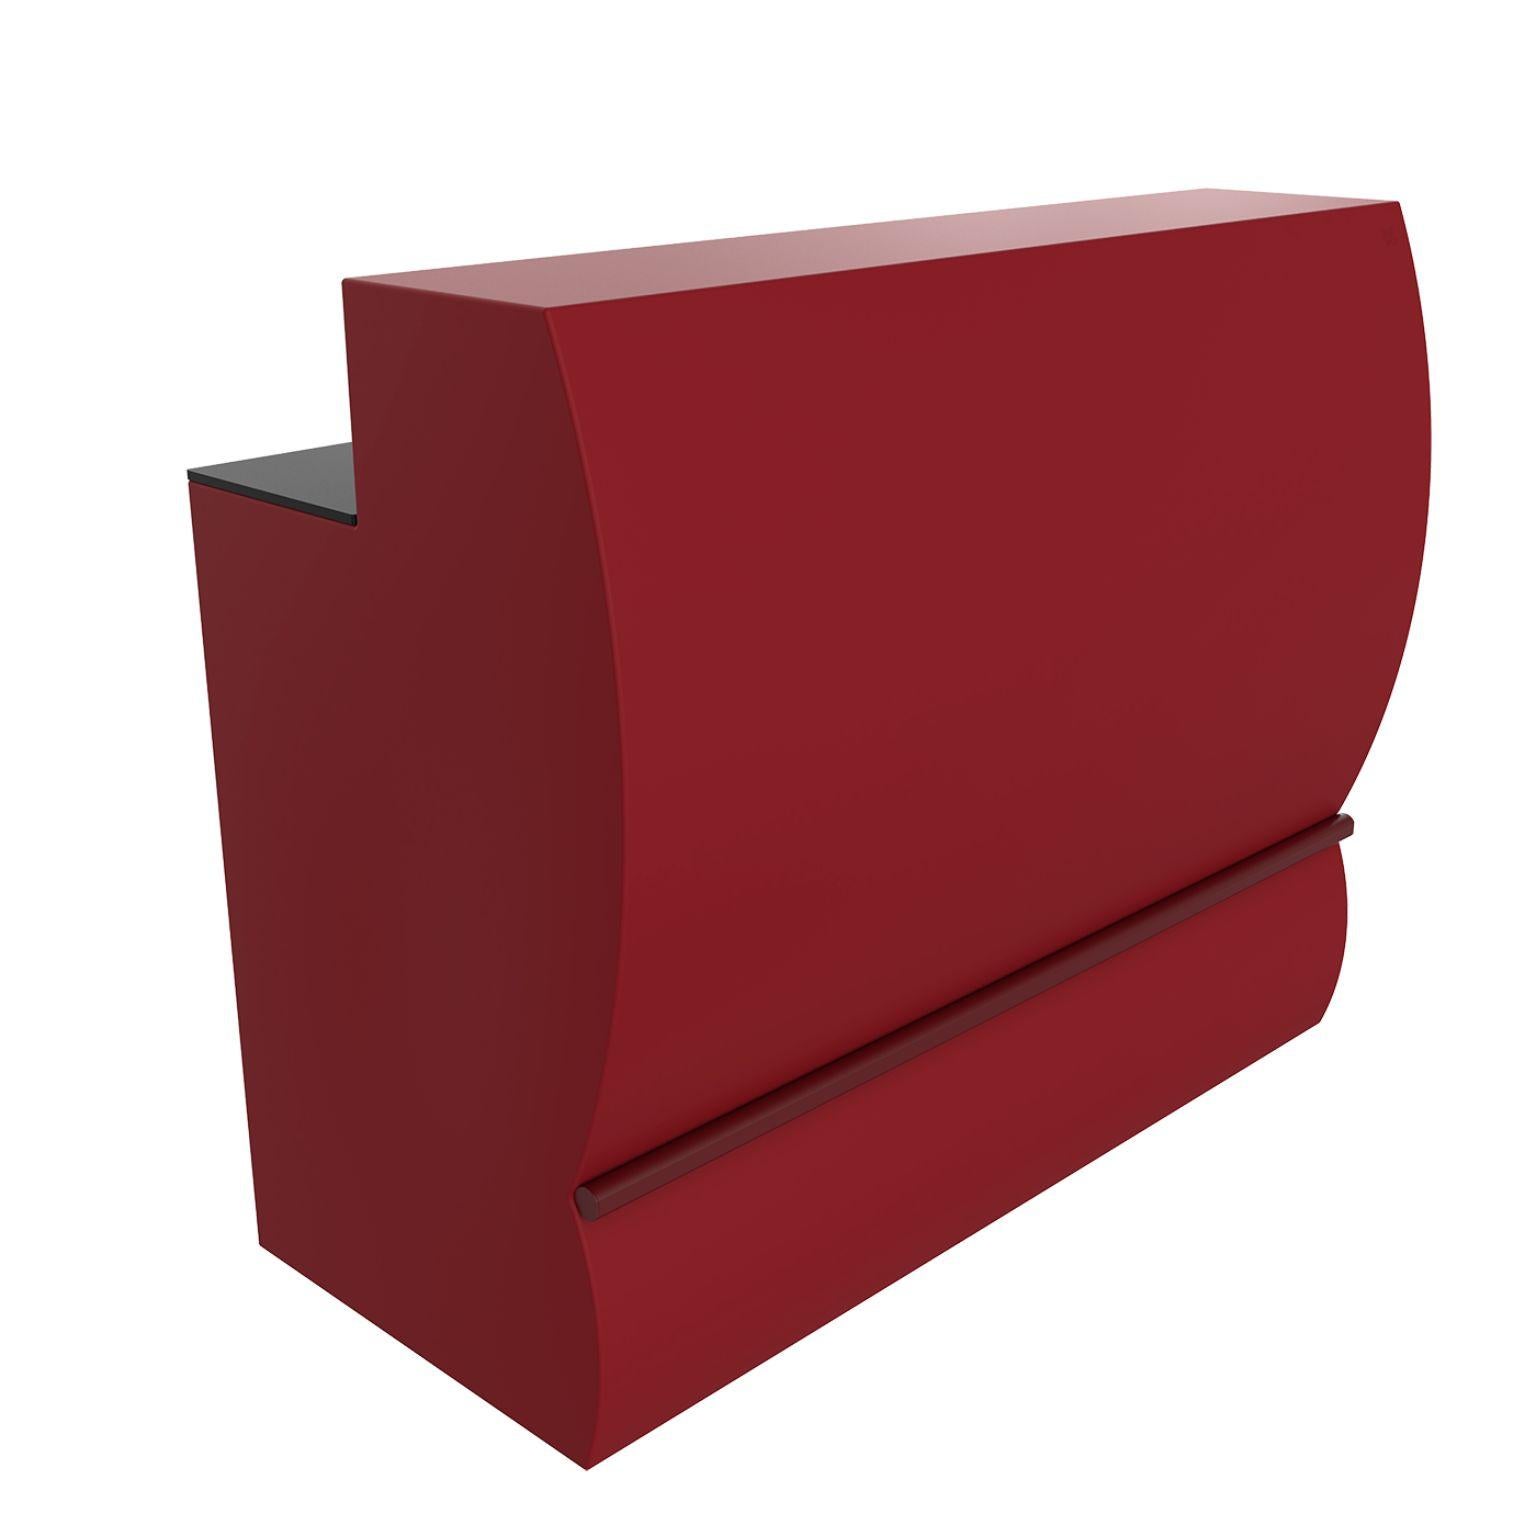 Burgundy straight Lace bar by Mowee
Dimensions: D 68 x W 140 x H 115 cm.
Material: Polyethylene and stainless steel.
Weight: 45 kg.
Also available in different colors and finishes (lacquered, retroilluminated). Optional wheel kit and optional